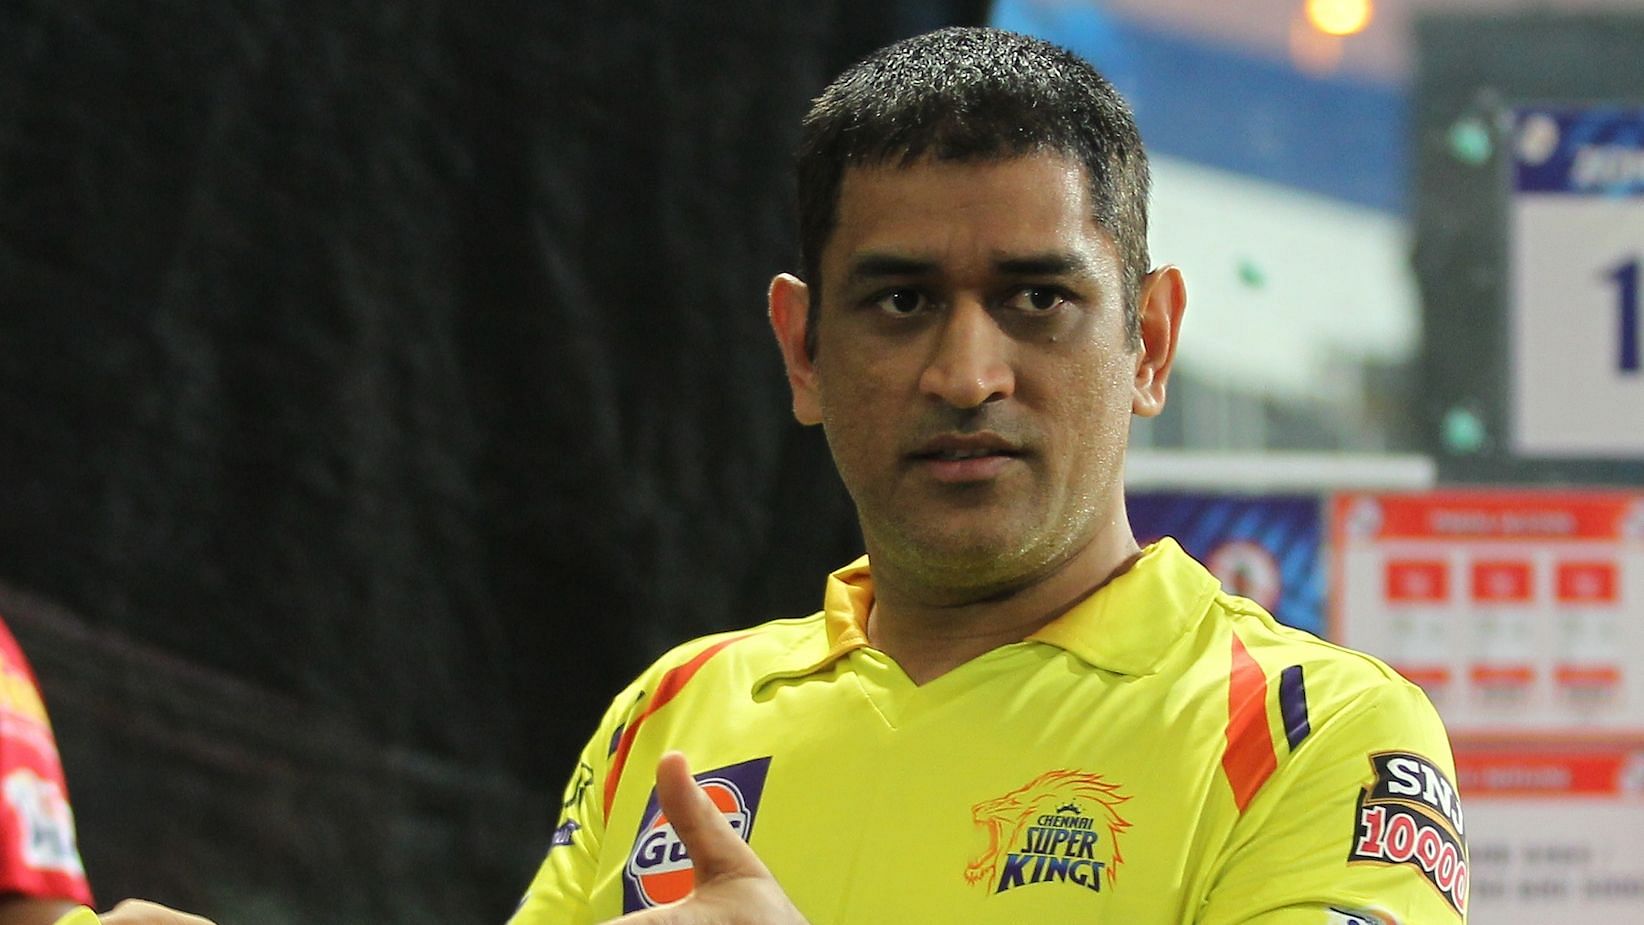 MS Dhoni scored only 200 runs in this season of the IPL, his lowest aggregate in a season with an average of just 25.